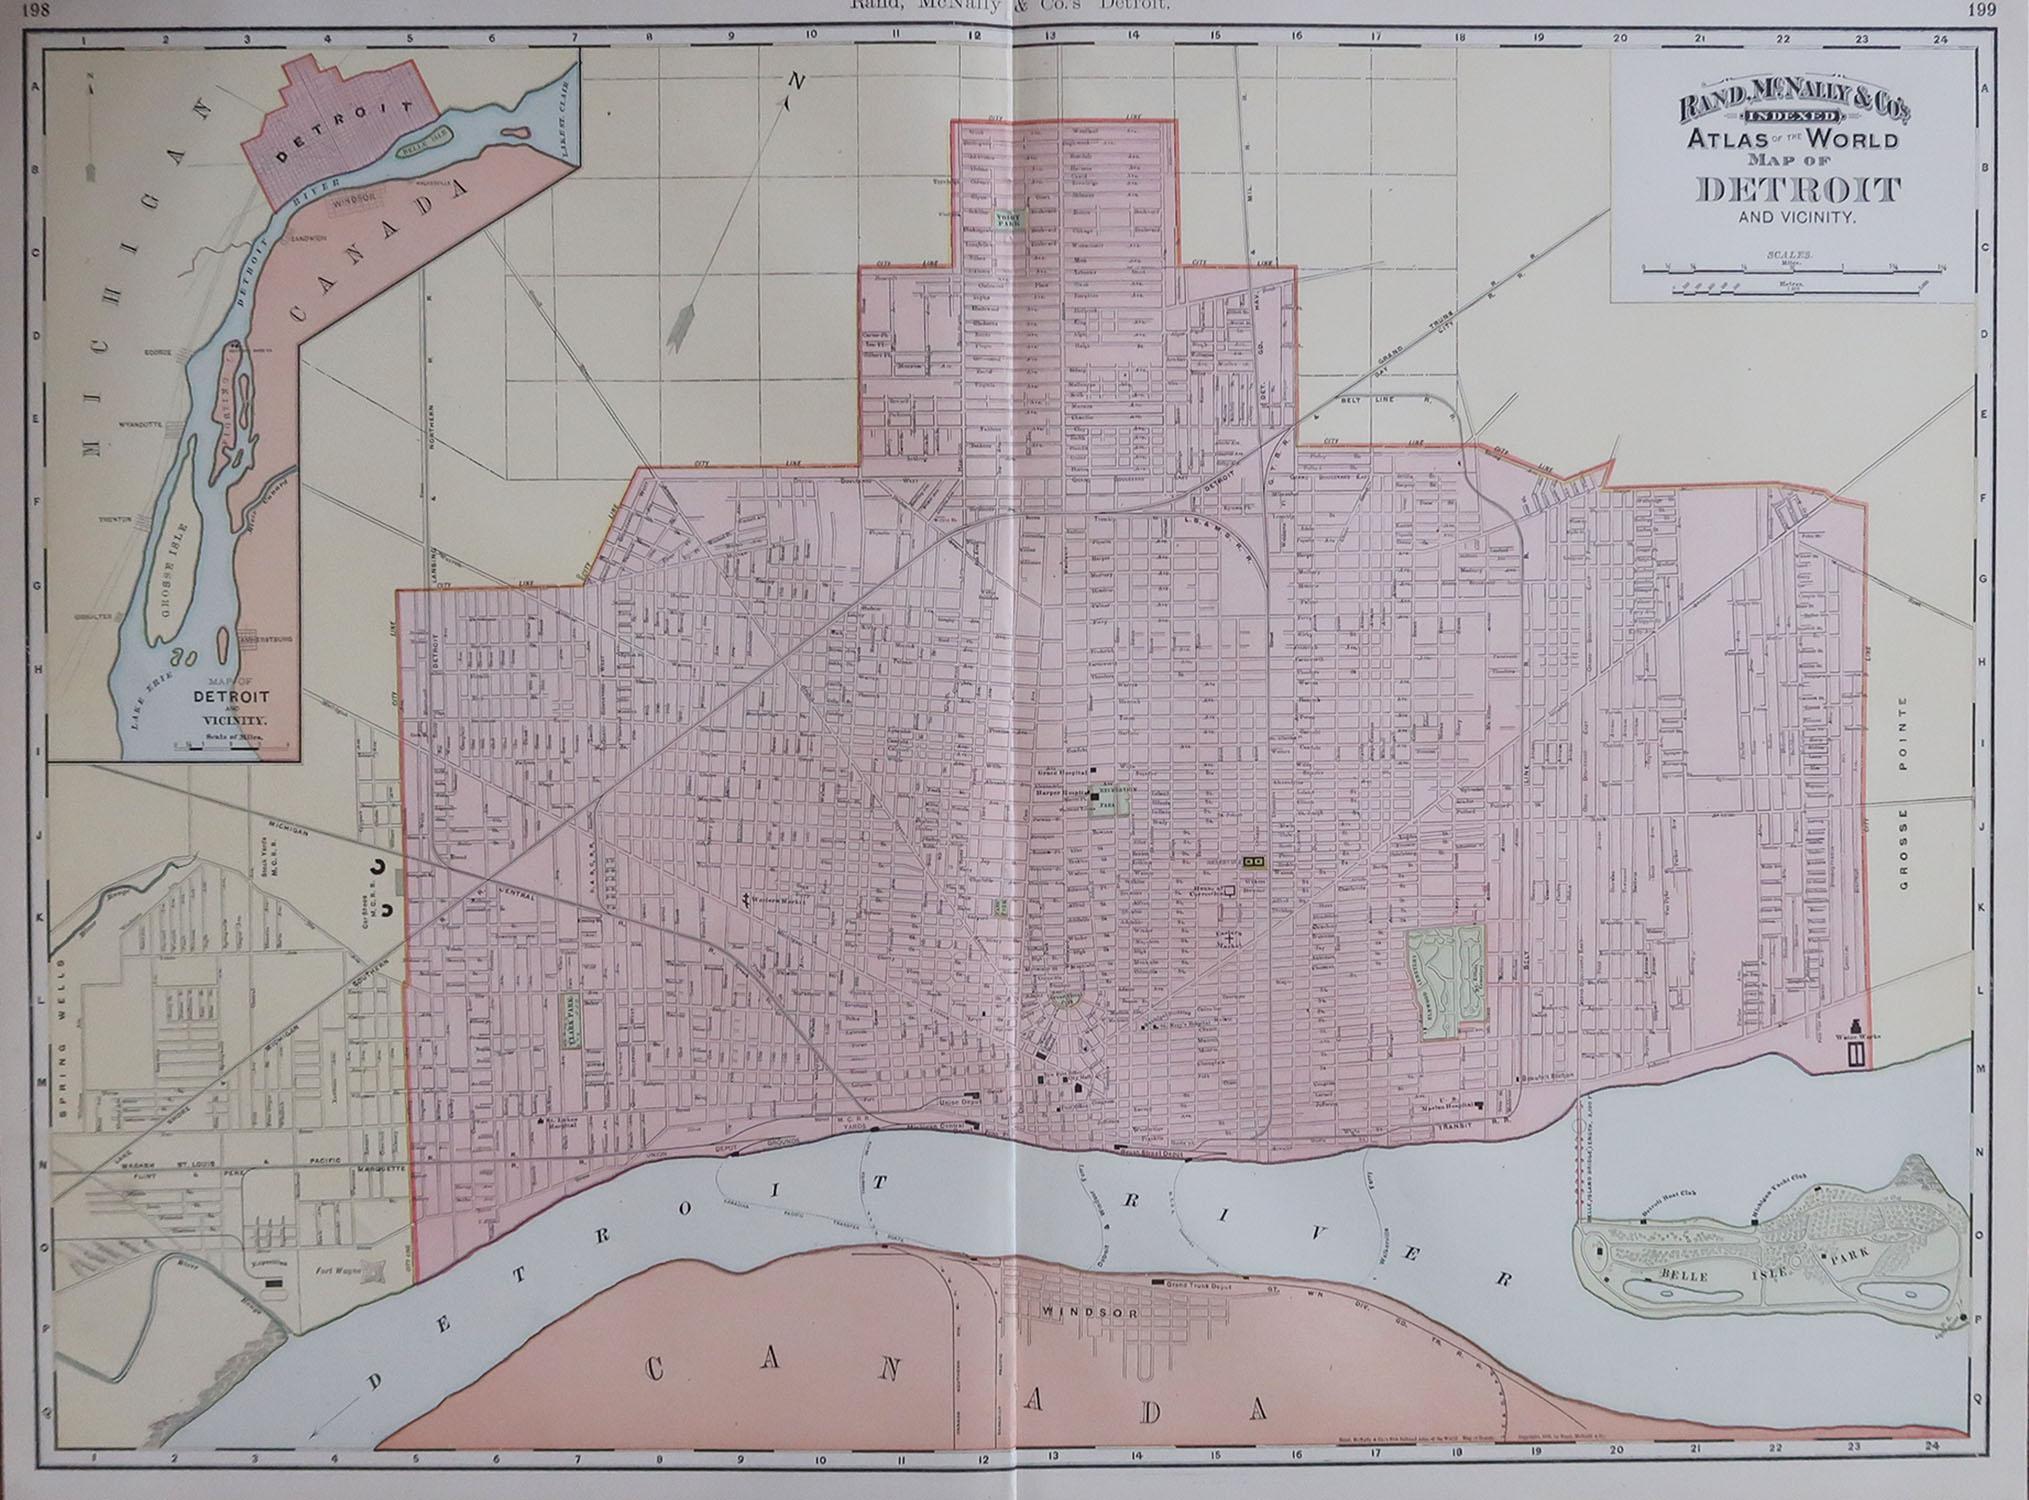 Fabulous colorful map of Detroit

Original color

By Rand, McNally & Co.

Published, 1894

Unframed

Free shipping.